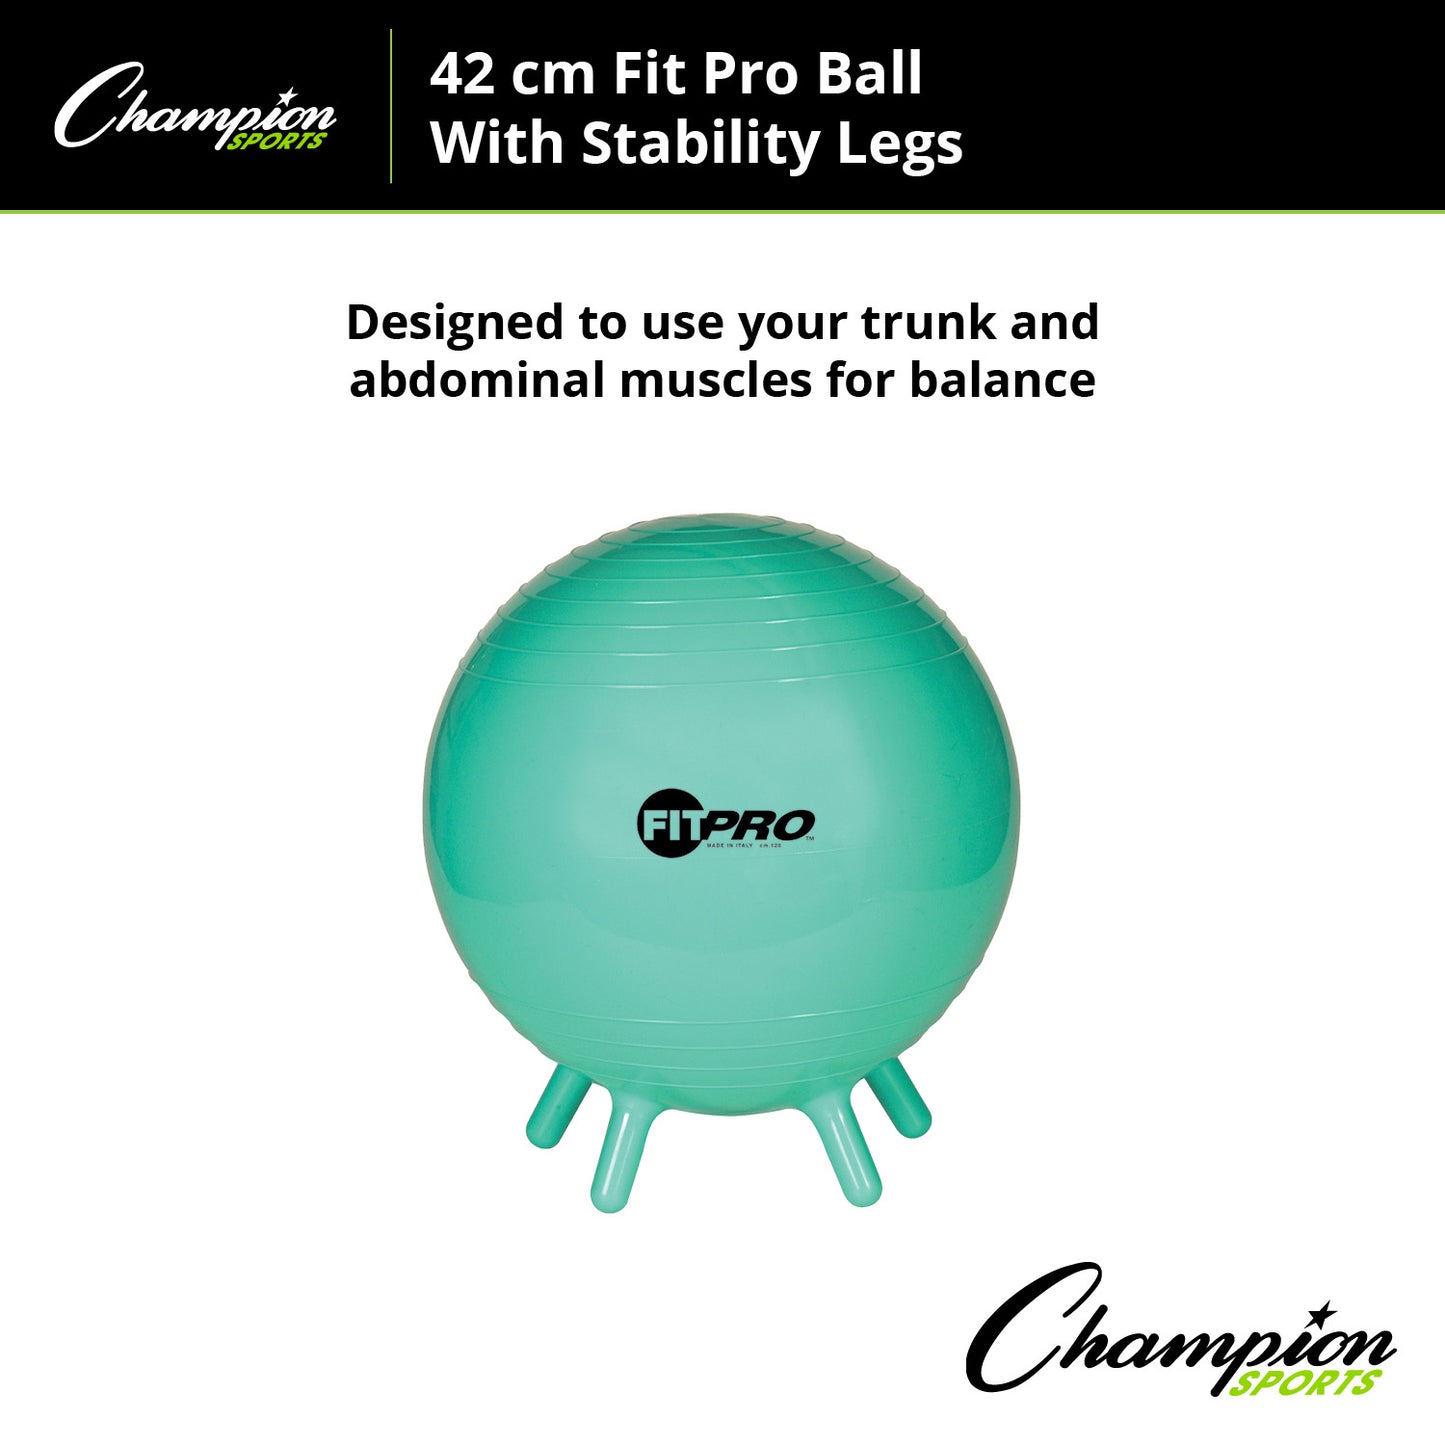 FitPro Ball with Stability Legs, 42cm